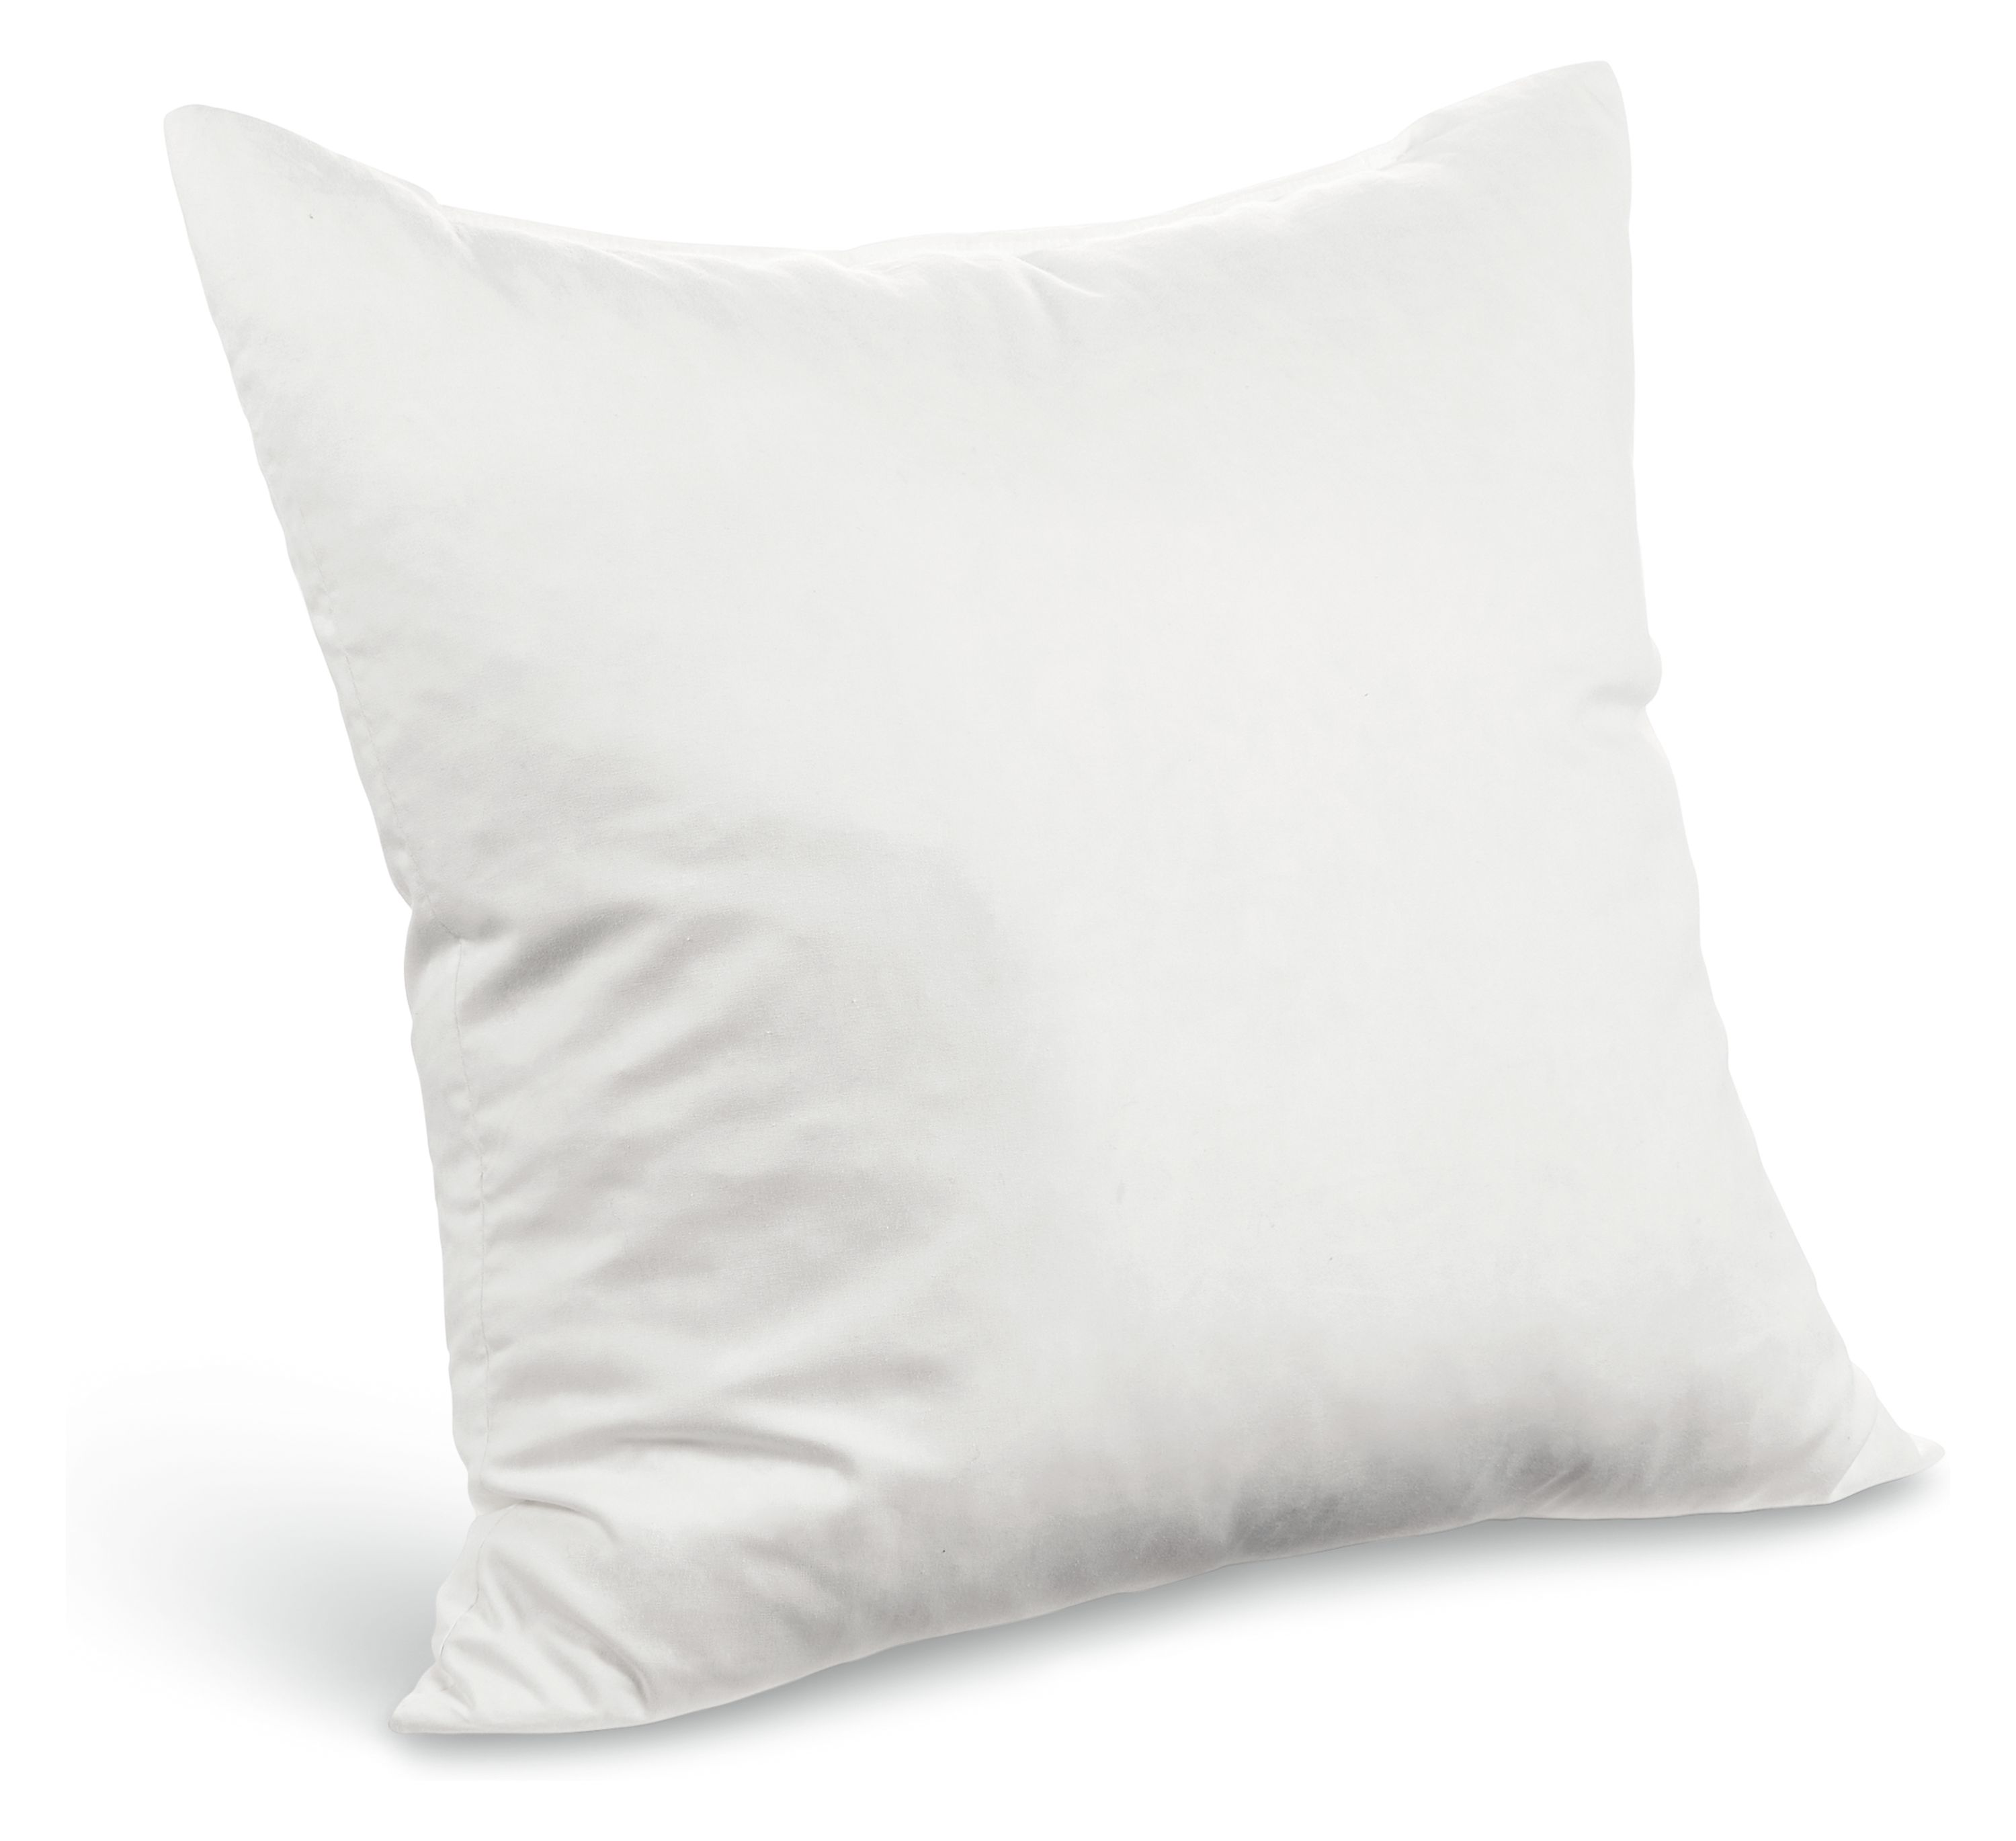 18x18 Feather Pillow insert - Made in USA 95/5 Feather Down Blend Pillow  Insert - 18 x 18 pillow insert for a 16 x 16 pillow cover